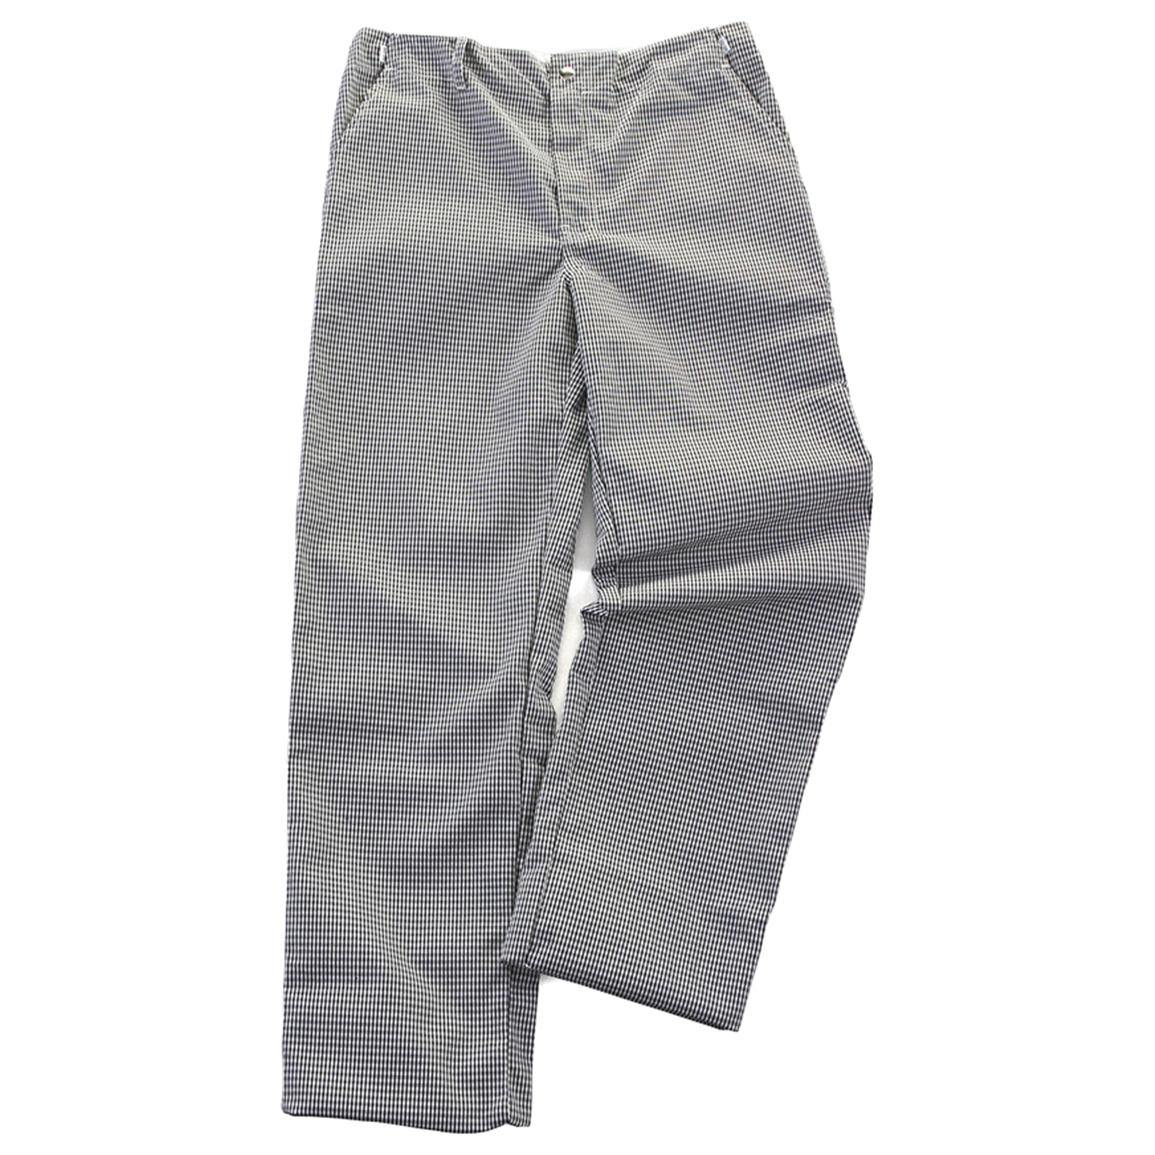 Chef Pants - 186121, Jeans & Pants at Sportsman's Guide